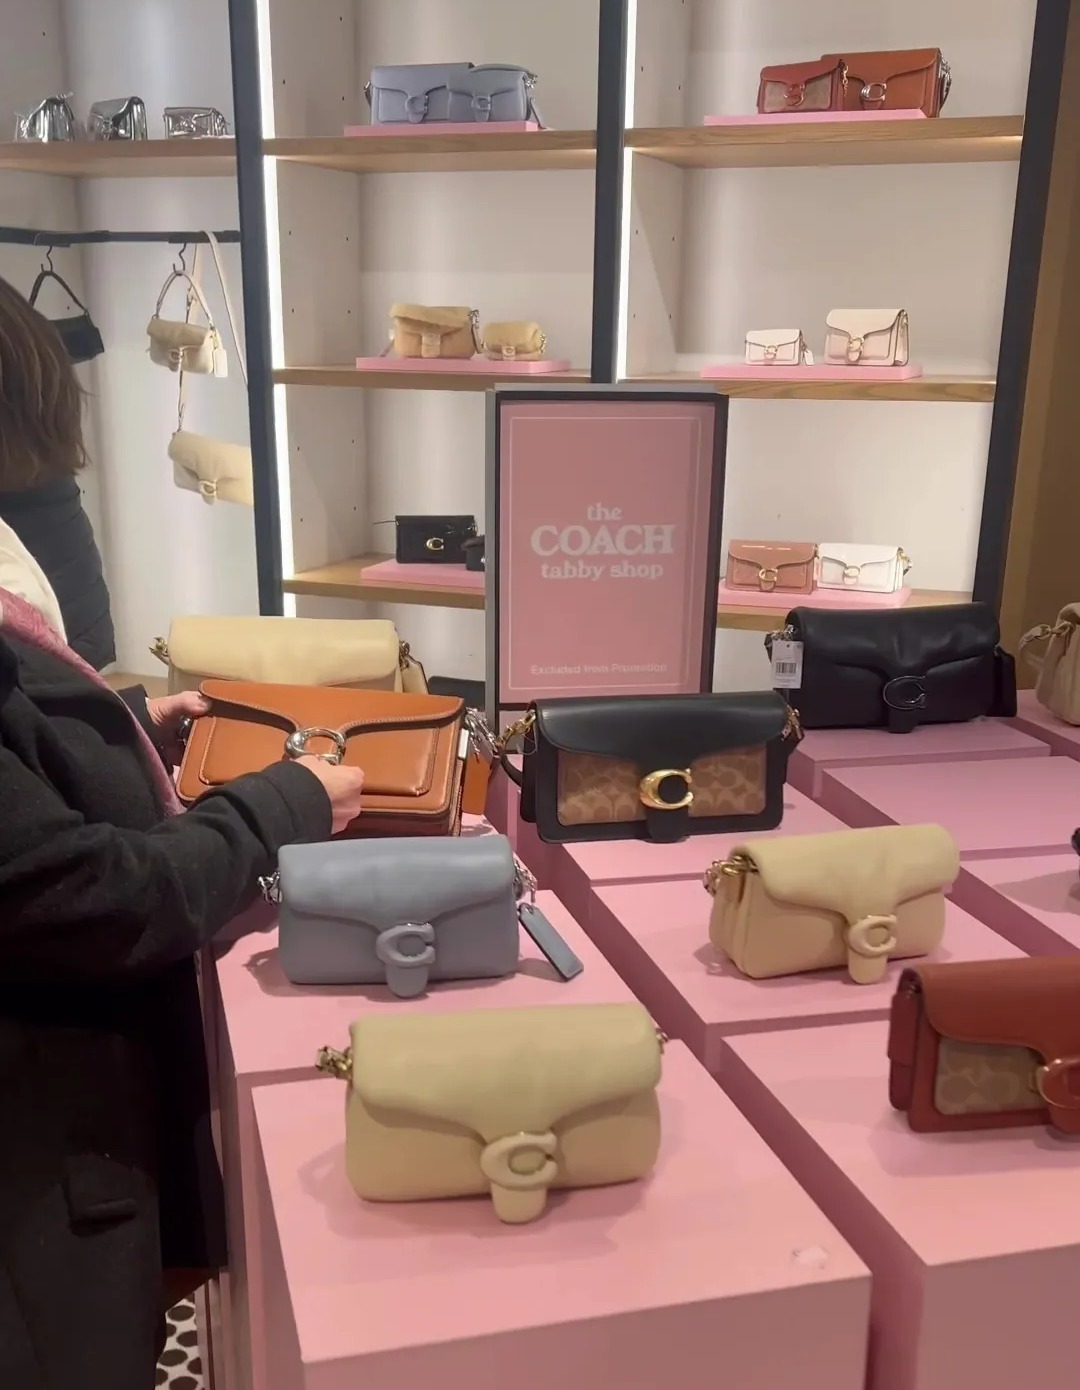 Coach's iconic Tabby bags had their very own section